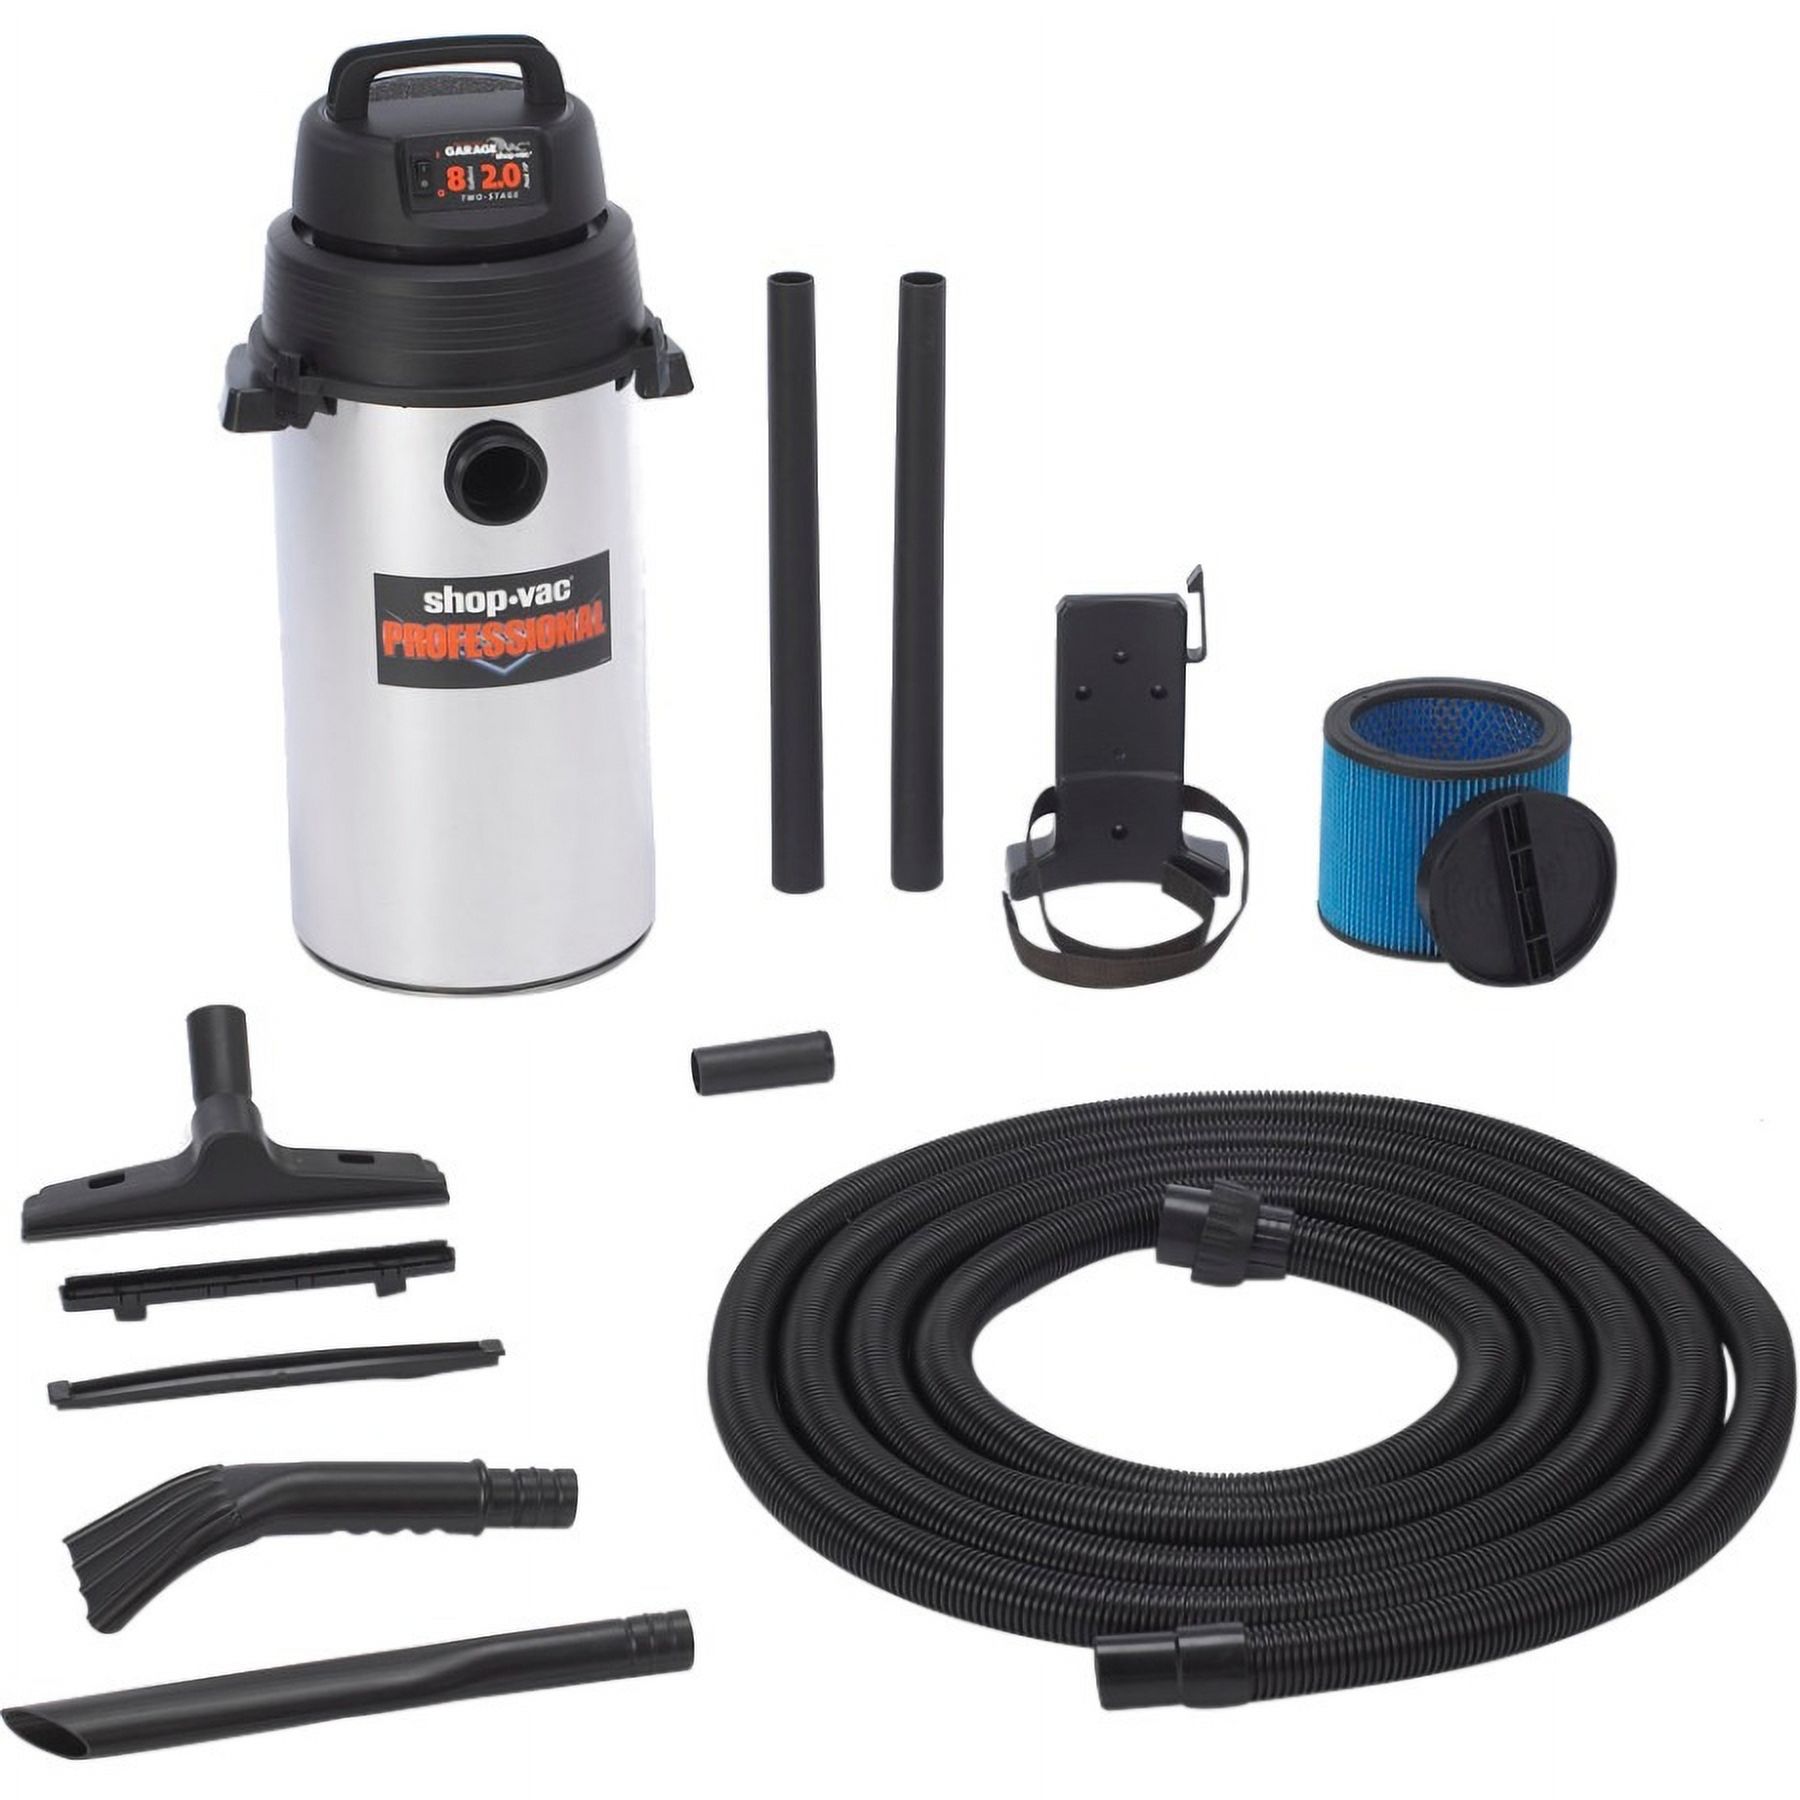 Shop-Vac Professional Canister Vacuum Cleaner - image 2 of 2